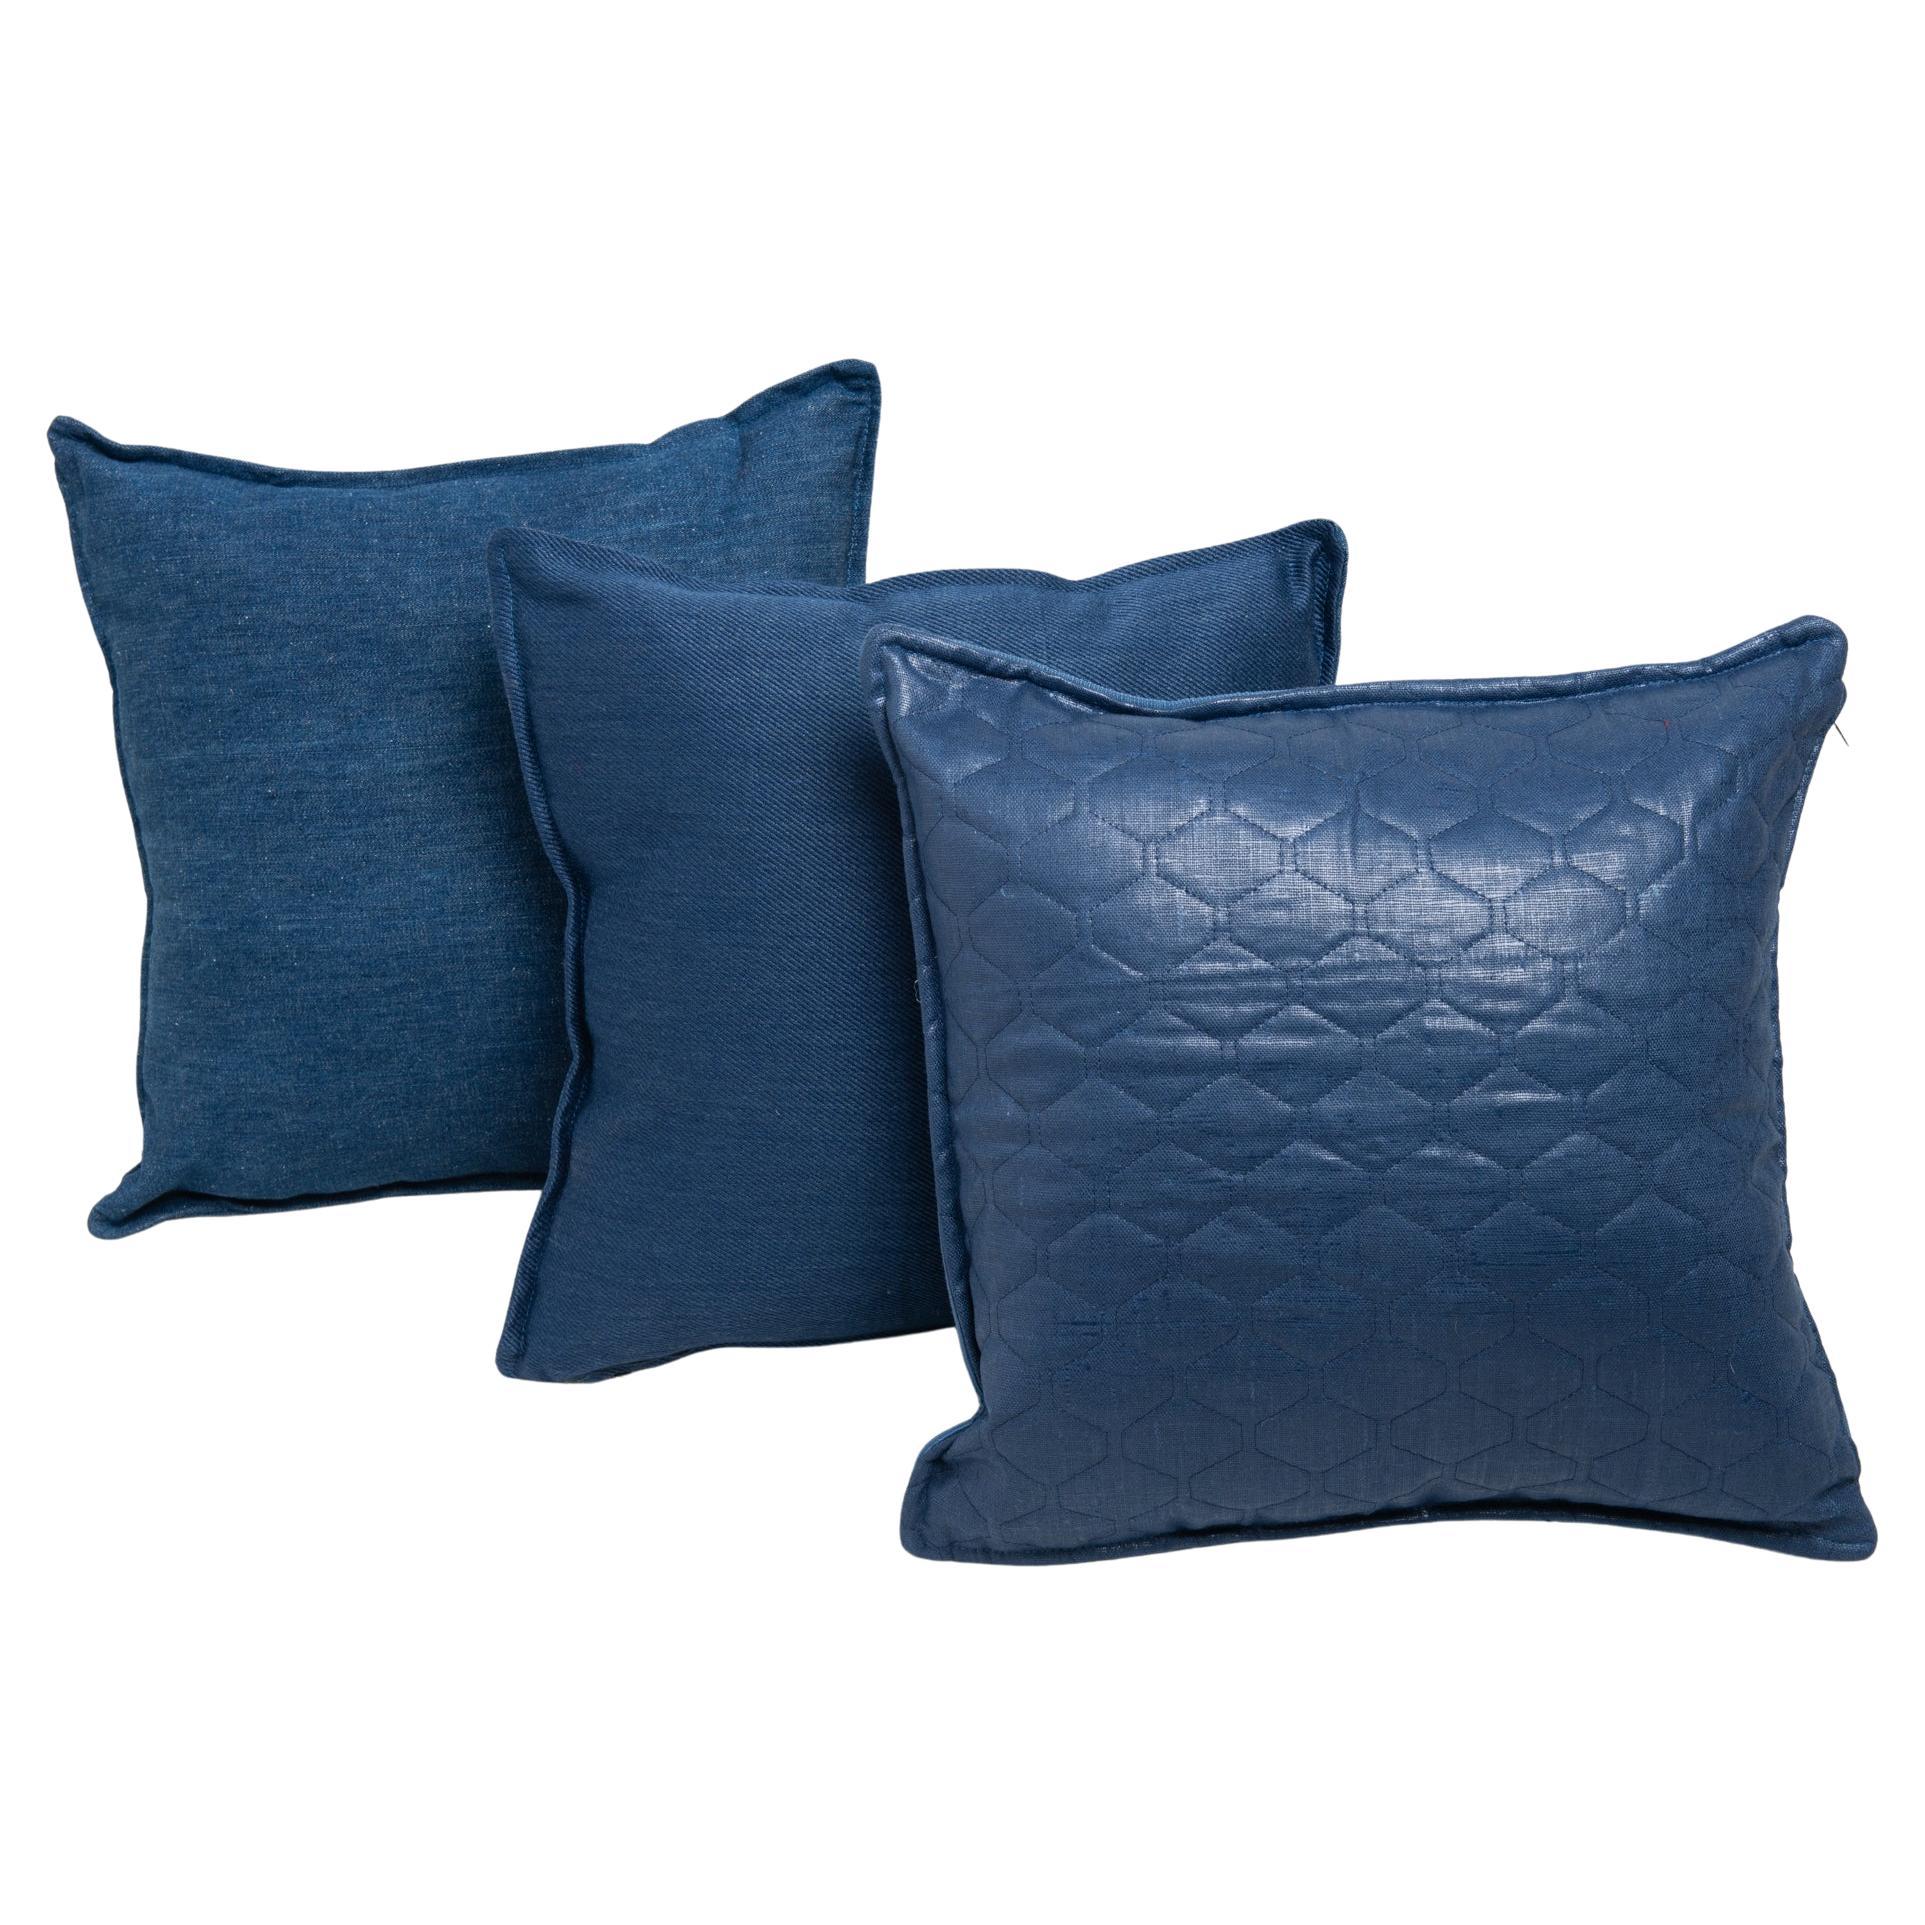 Three Casual Pillows in Old Denim Fabric For Sale